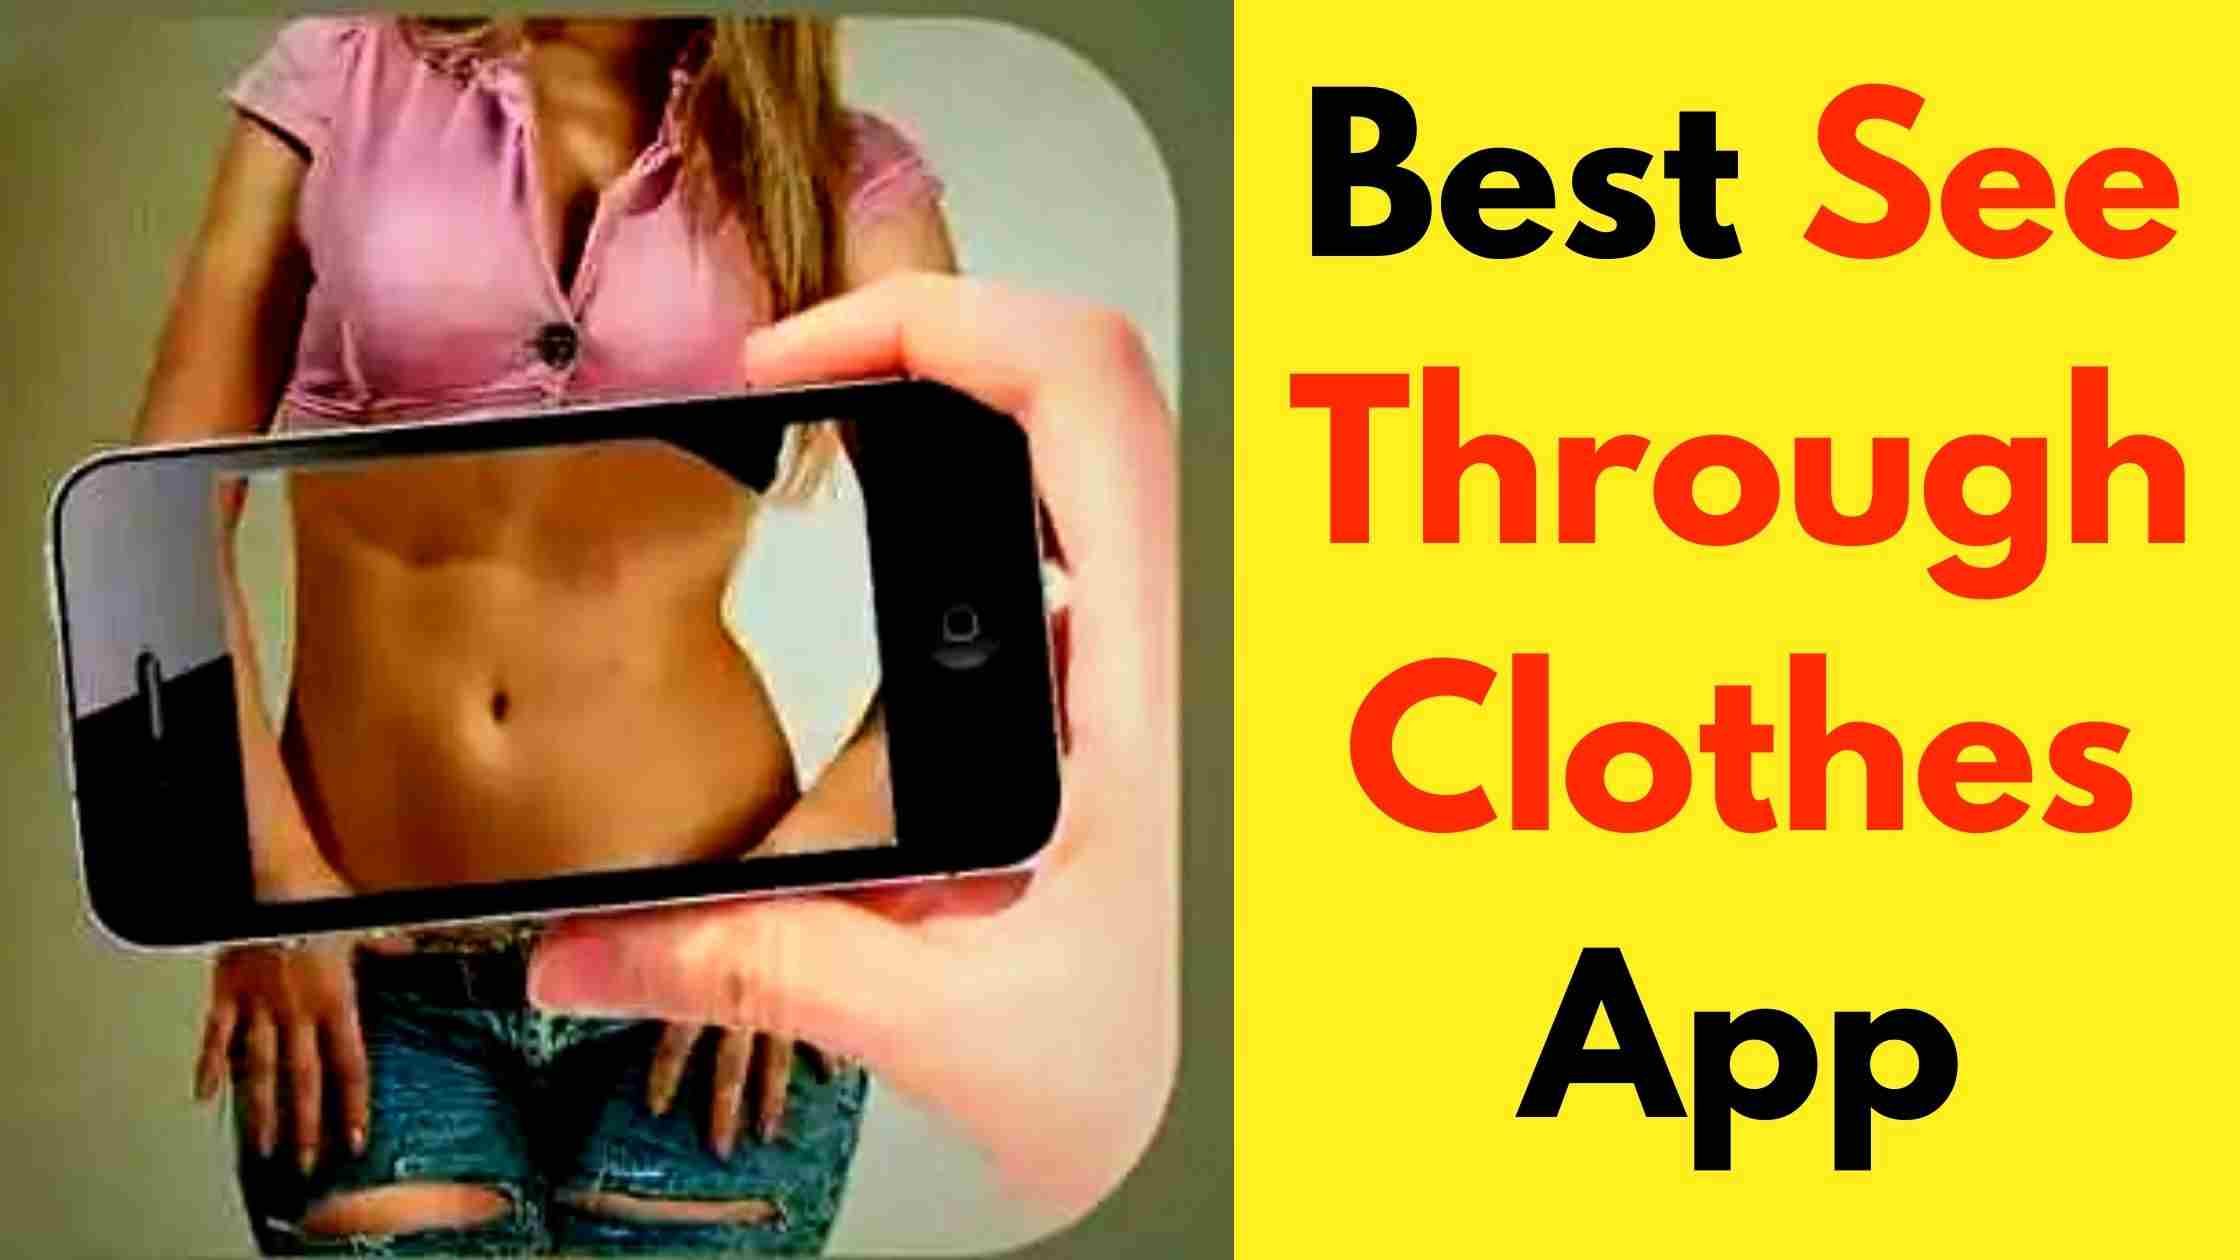 Apps To See Through Clothes ladies vaginas